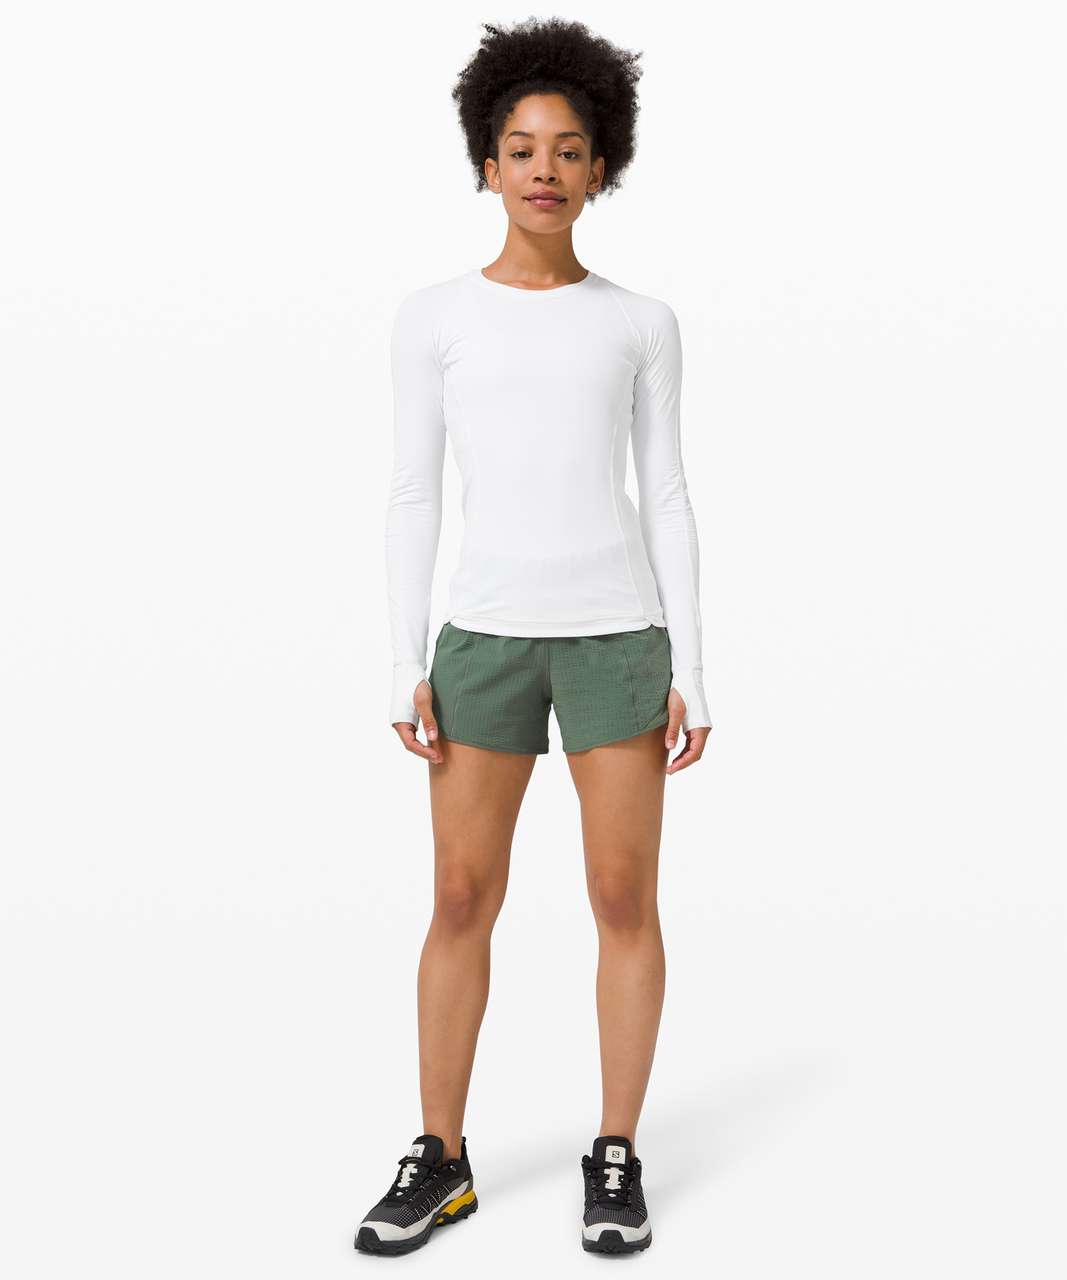 Lululemon 🍋 Kelly Green Hotty Hot Shorts in High Rise 2.5”. Size 10! 🍋 -  $29 (57% Off Retail) - From JAST